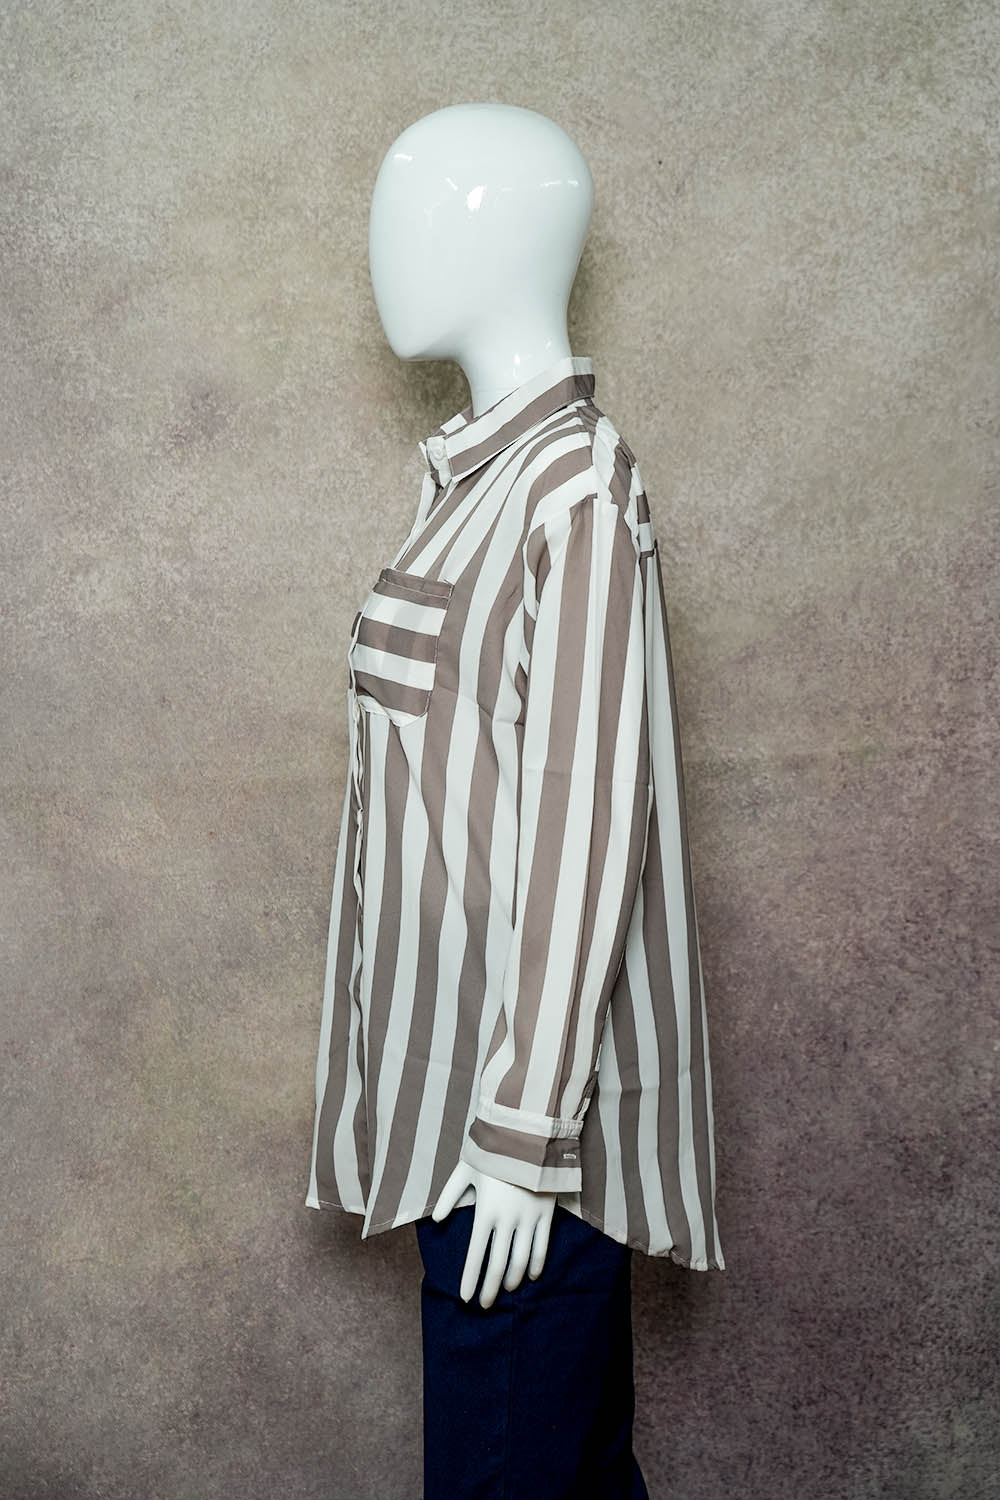 Brown Color Women Striped Shirts